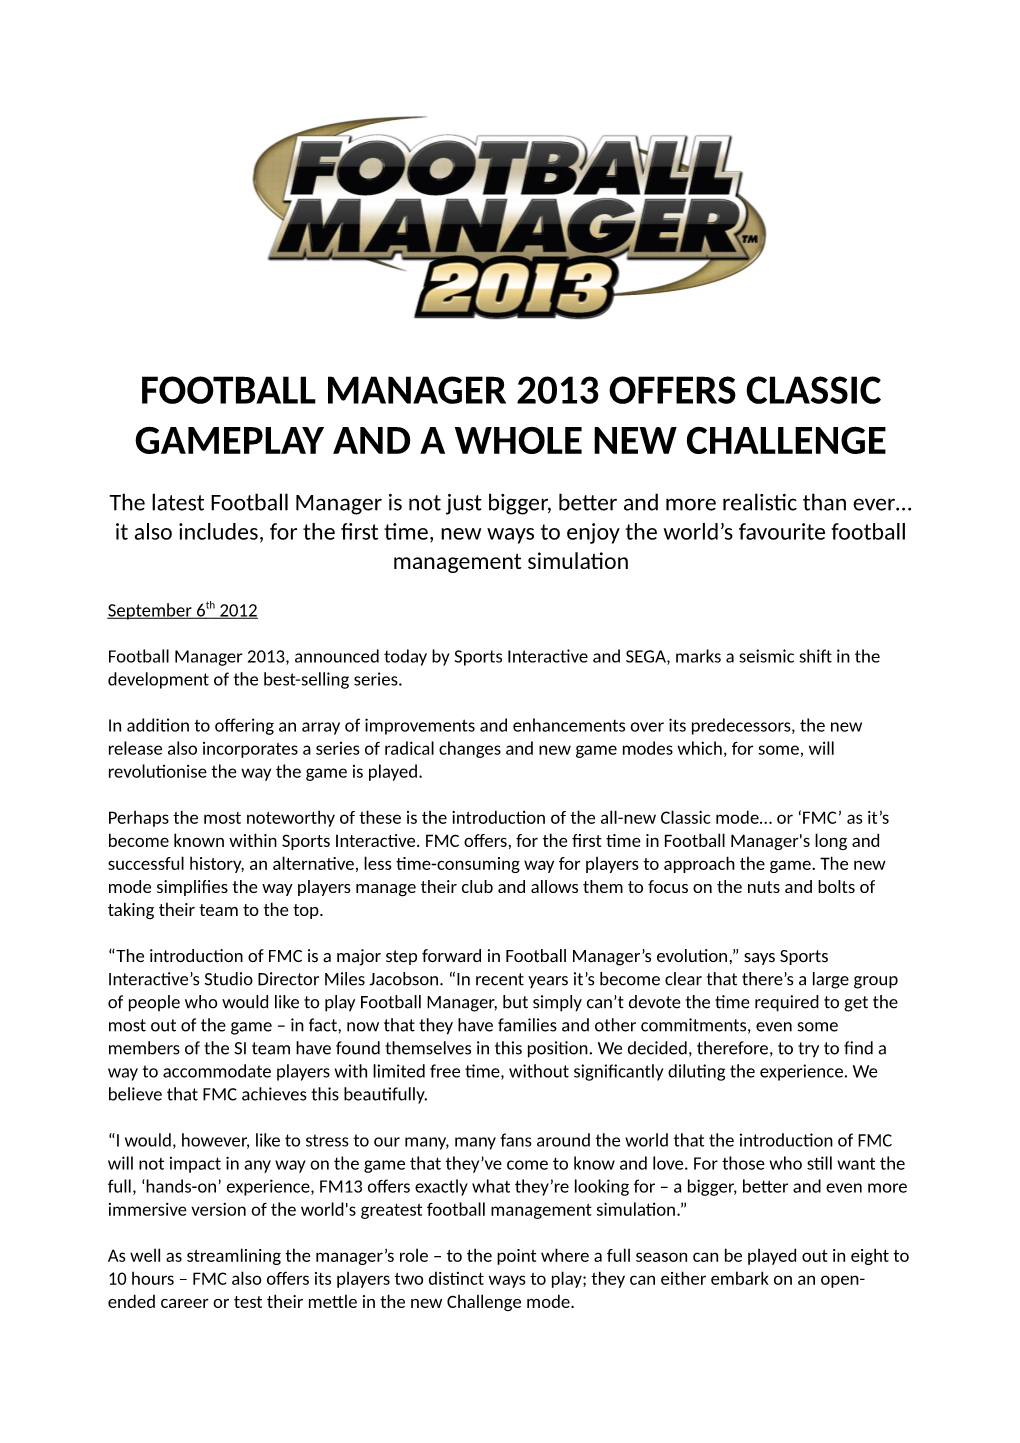 Football Manager 2013 Offers Classic Gameplay and a Whole New Challenge